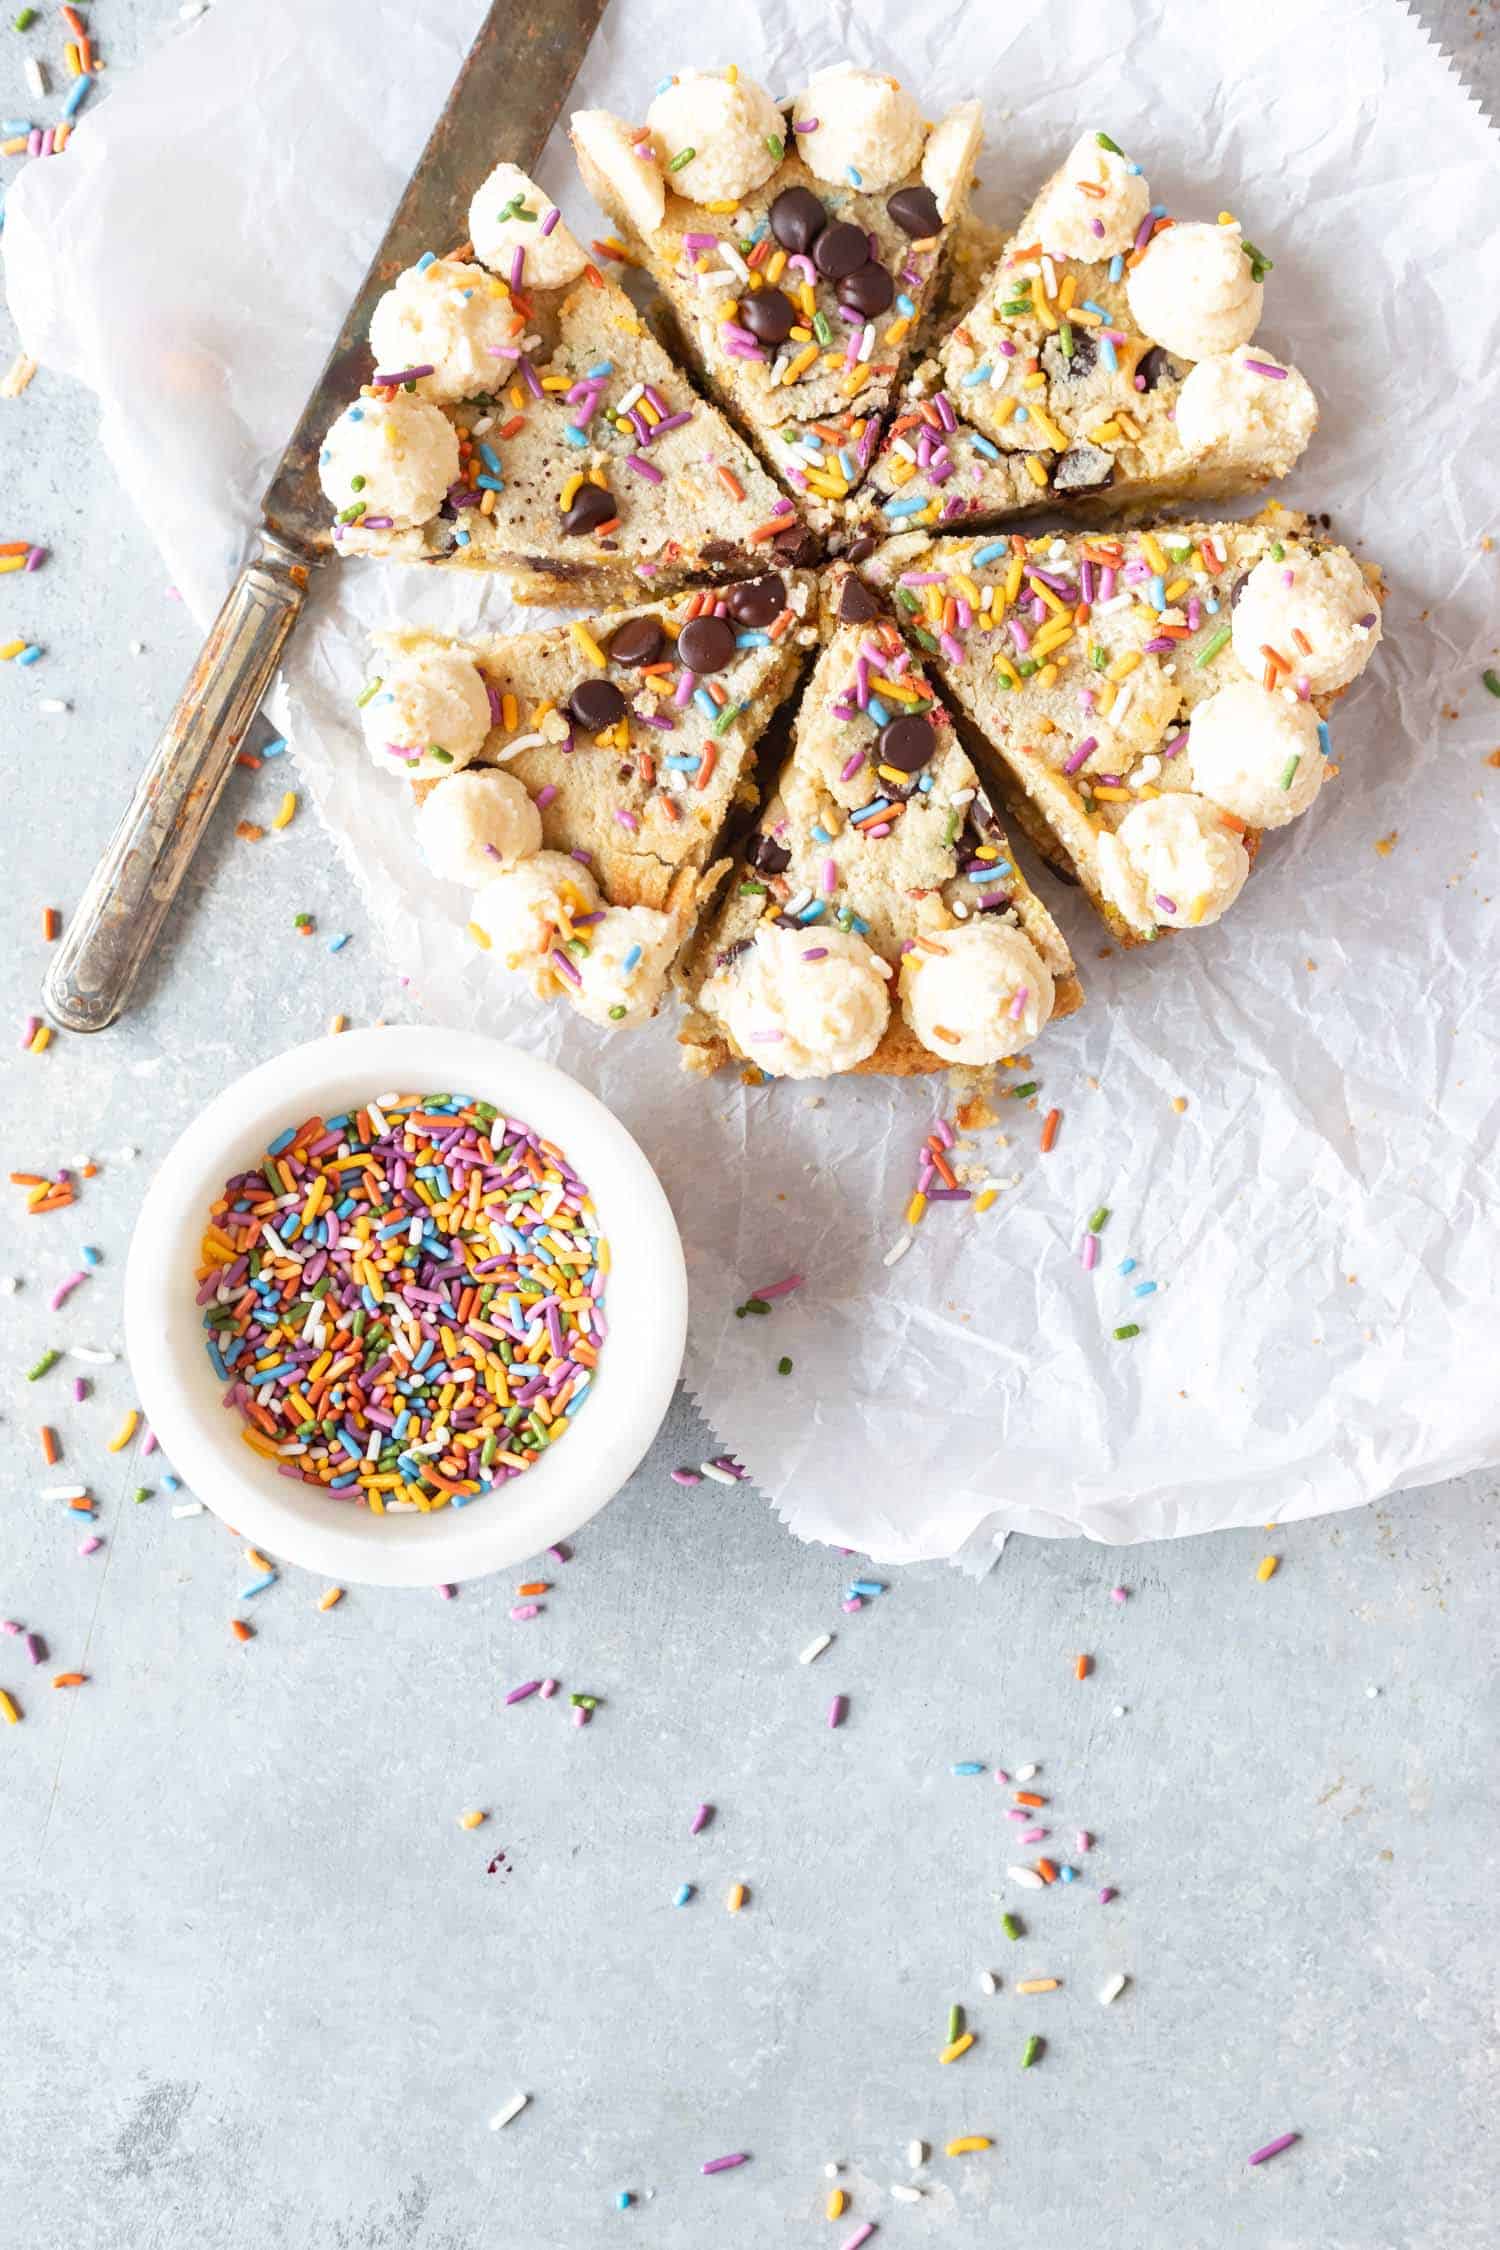 Keto Confetti Skillet Cookie on parchment with sprinkles scattered around